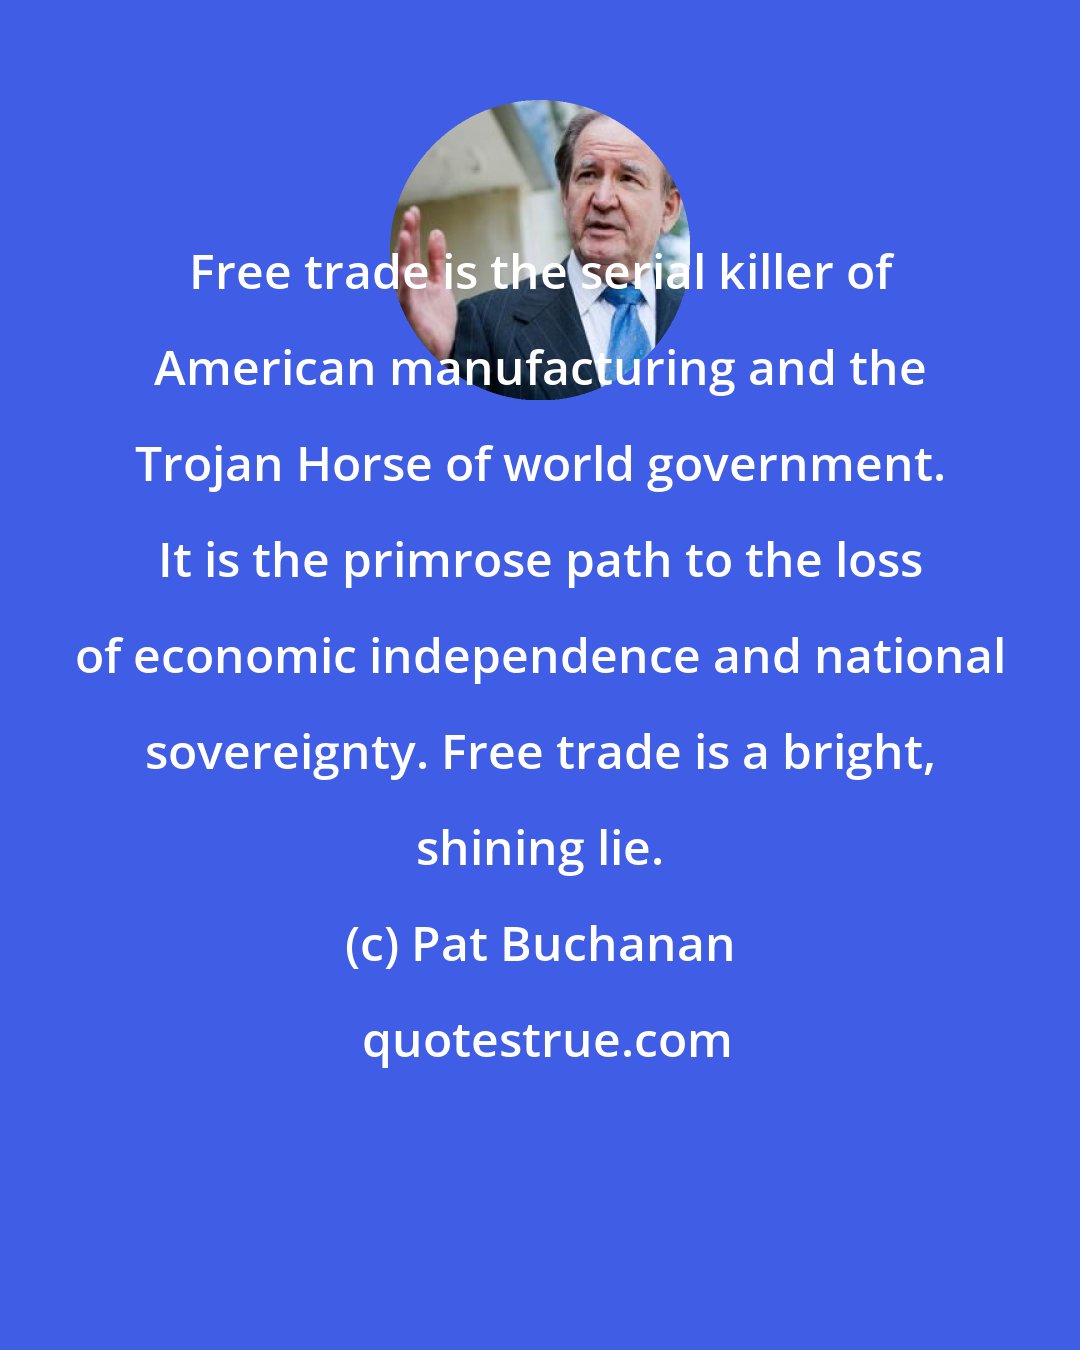 Pat Buchanan: Free trade is the serial killer of American manufacturing and the Trojan Horse of world government. It is the primrose path to the loss of economic independence and national sovereignty. Free trade is a bright, shining lie.